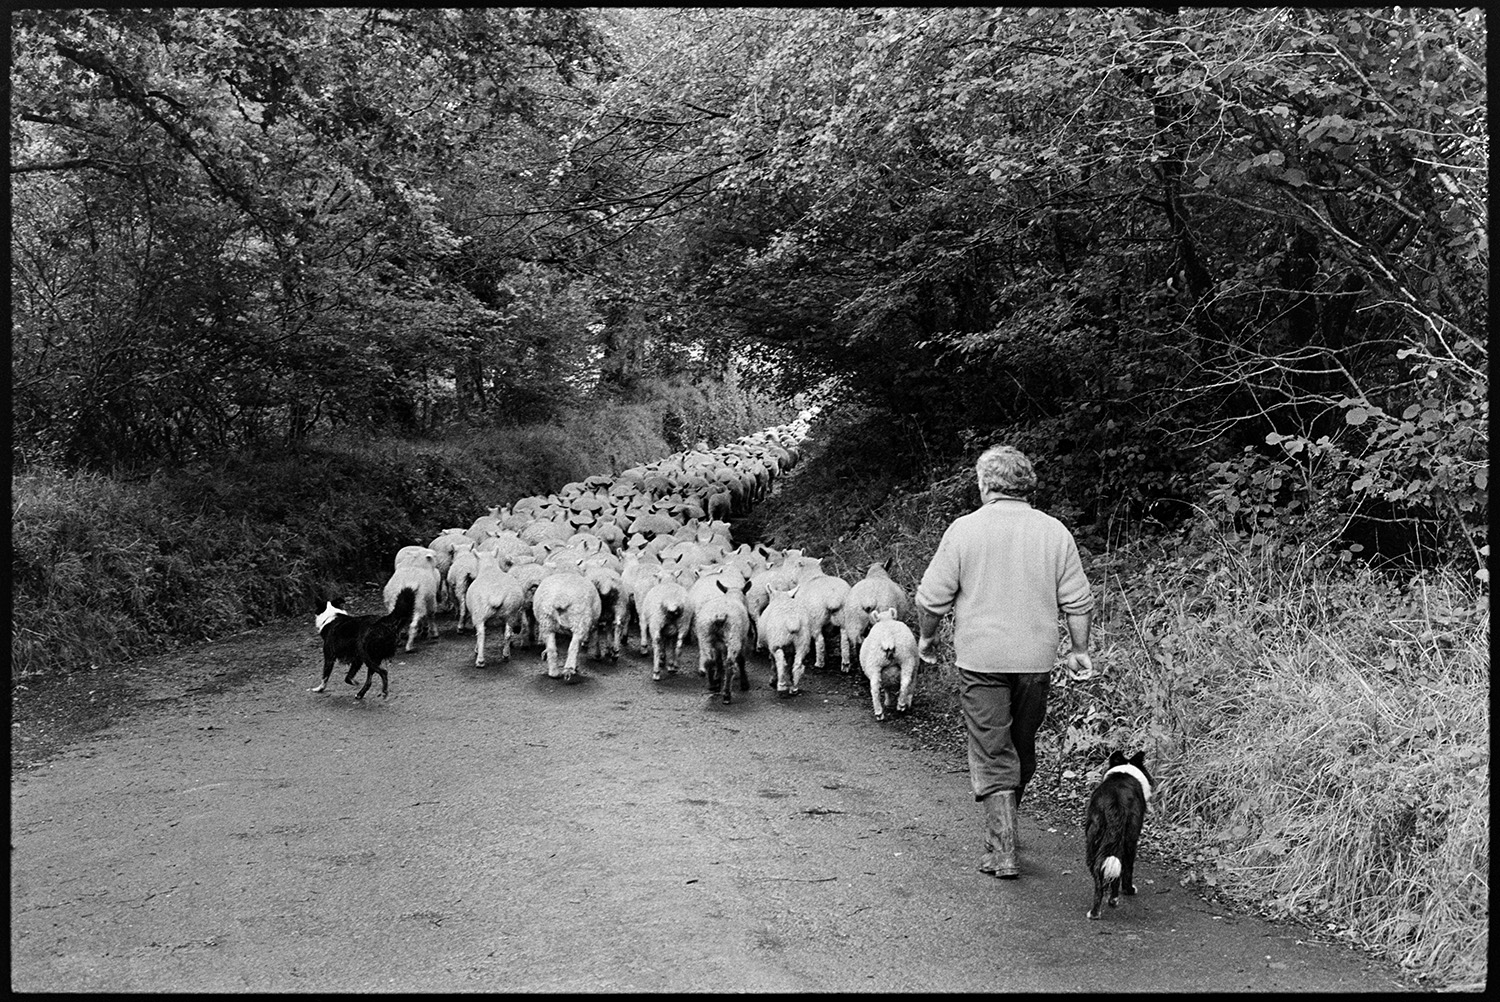 Sheep and shepherd in lane.
[John Squire with two dogs driving sheep down West Lane, Dolton. The lane is lined with trees.]